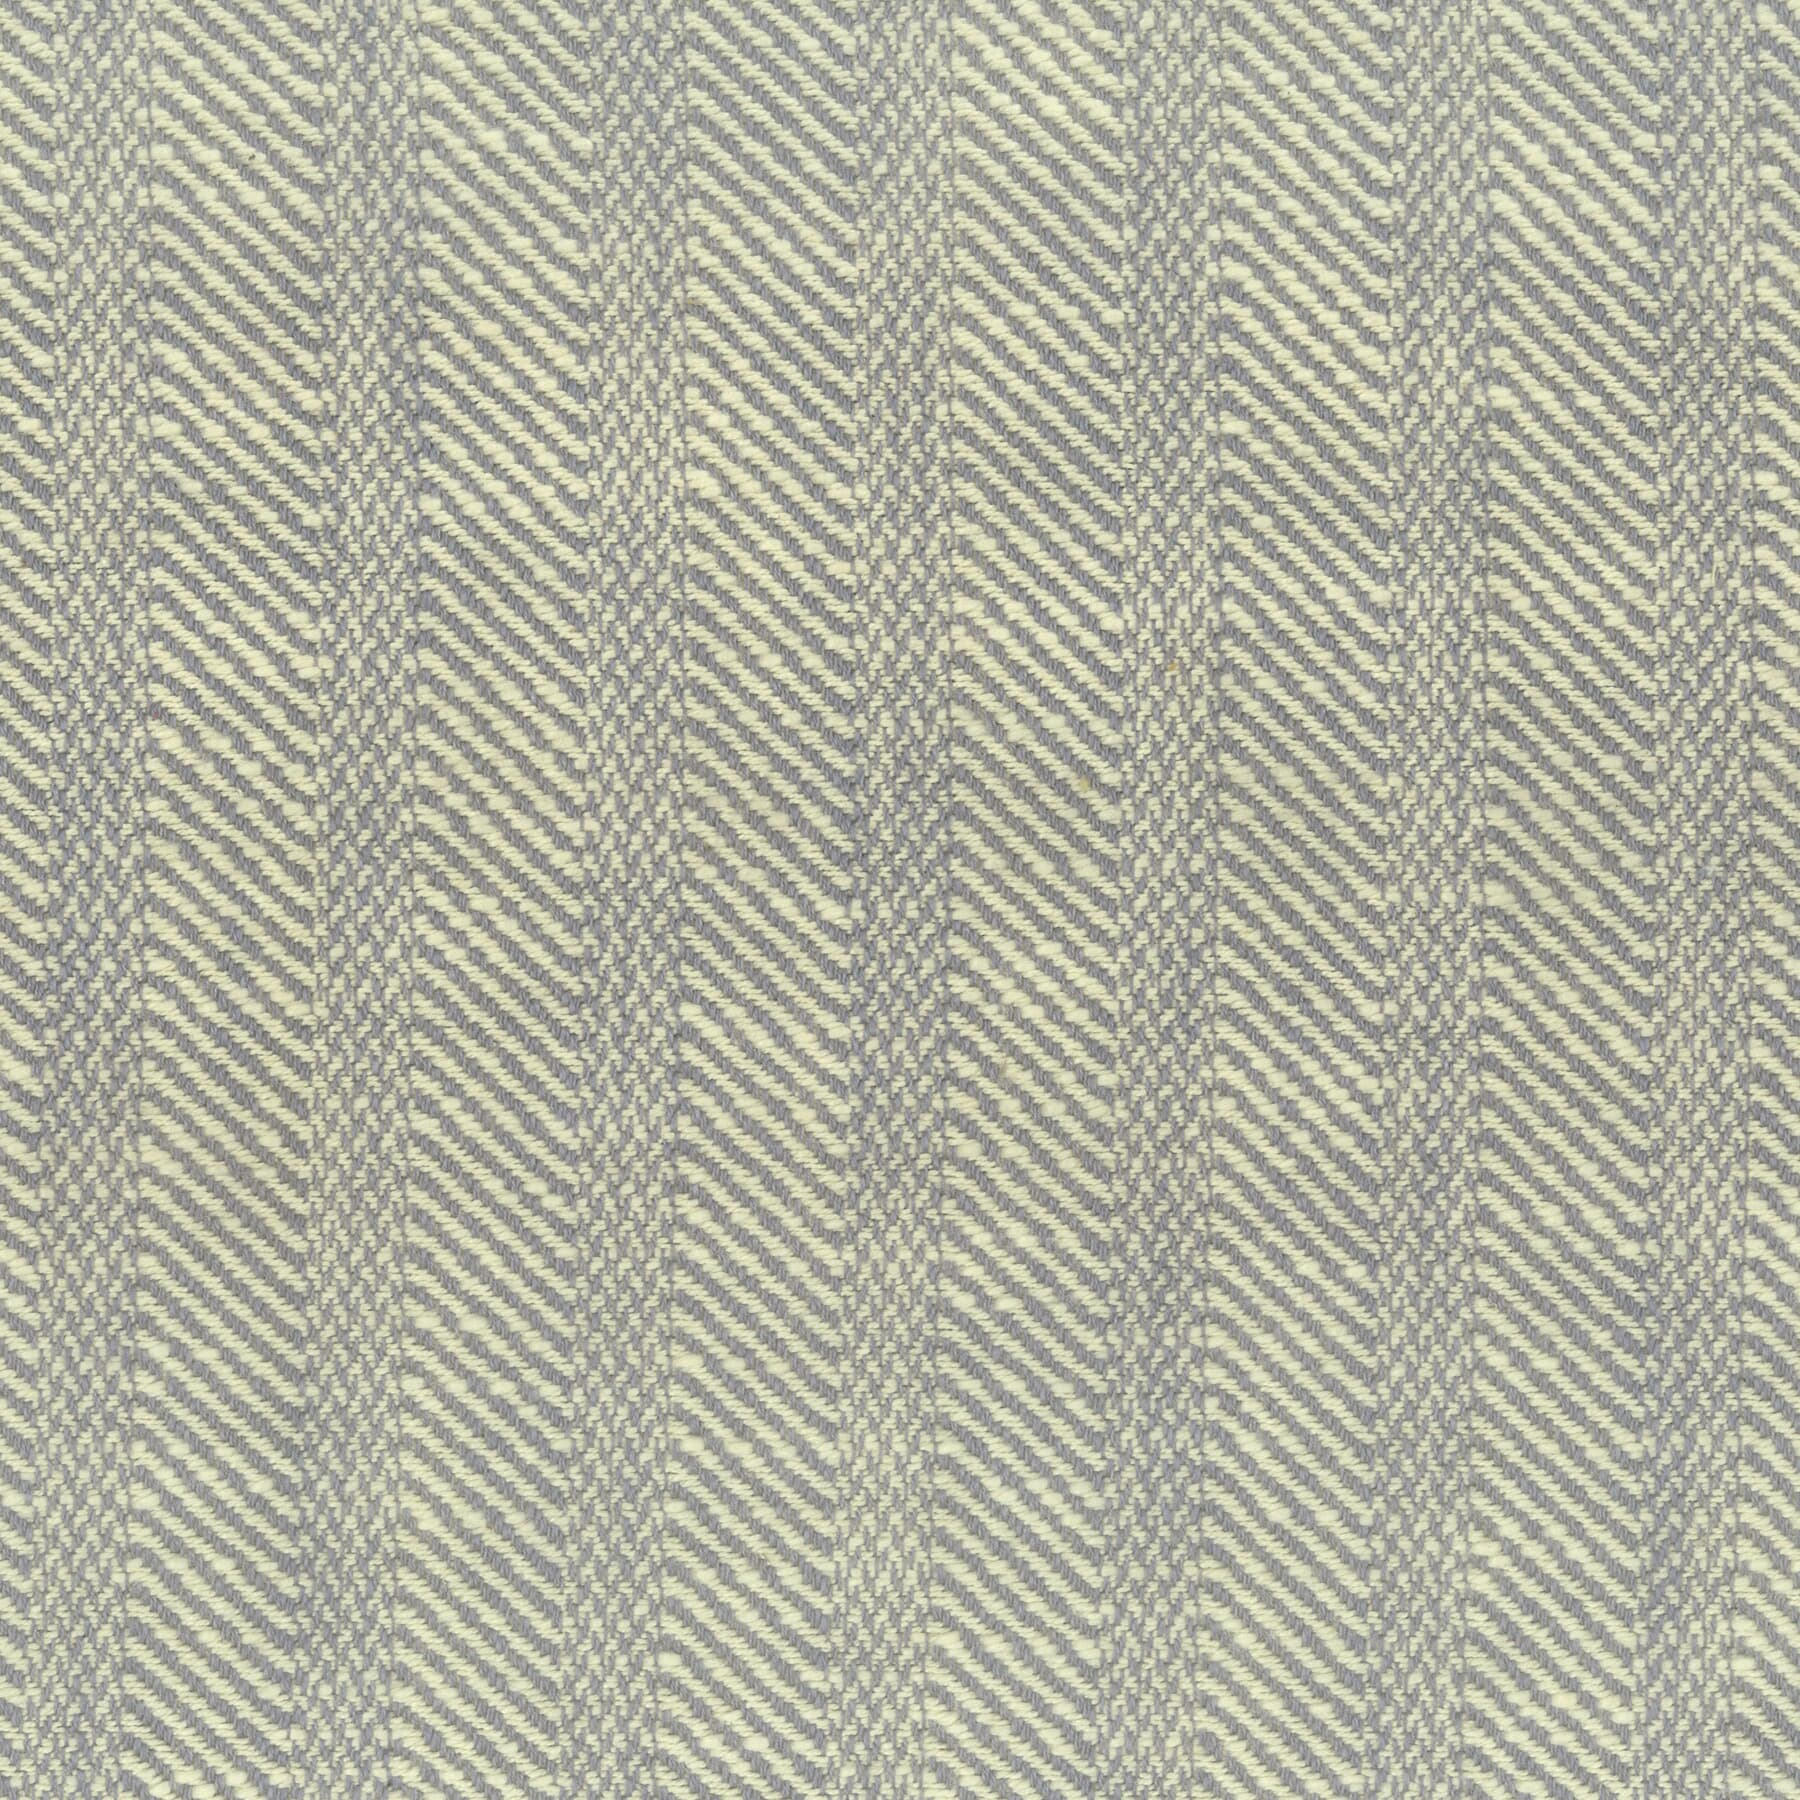 7650-04 Textured Stripe by Stout Fabric